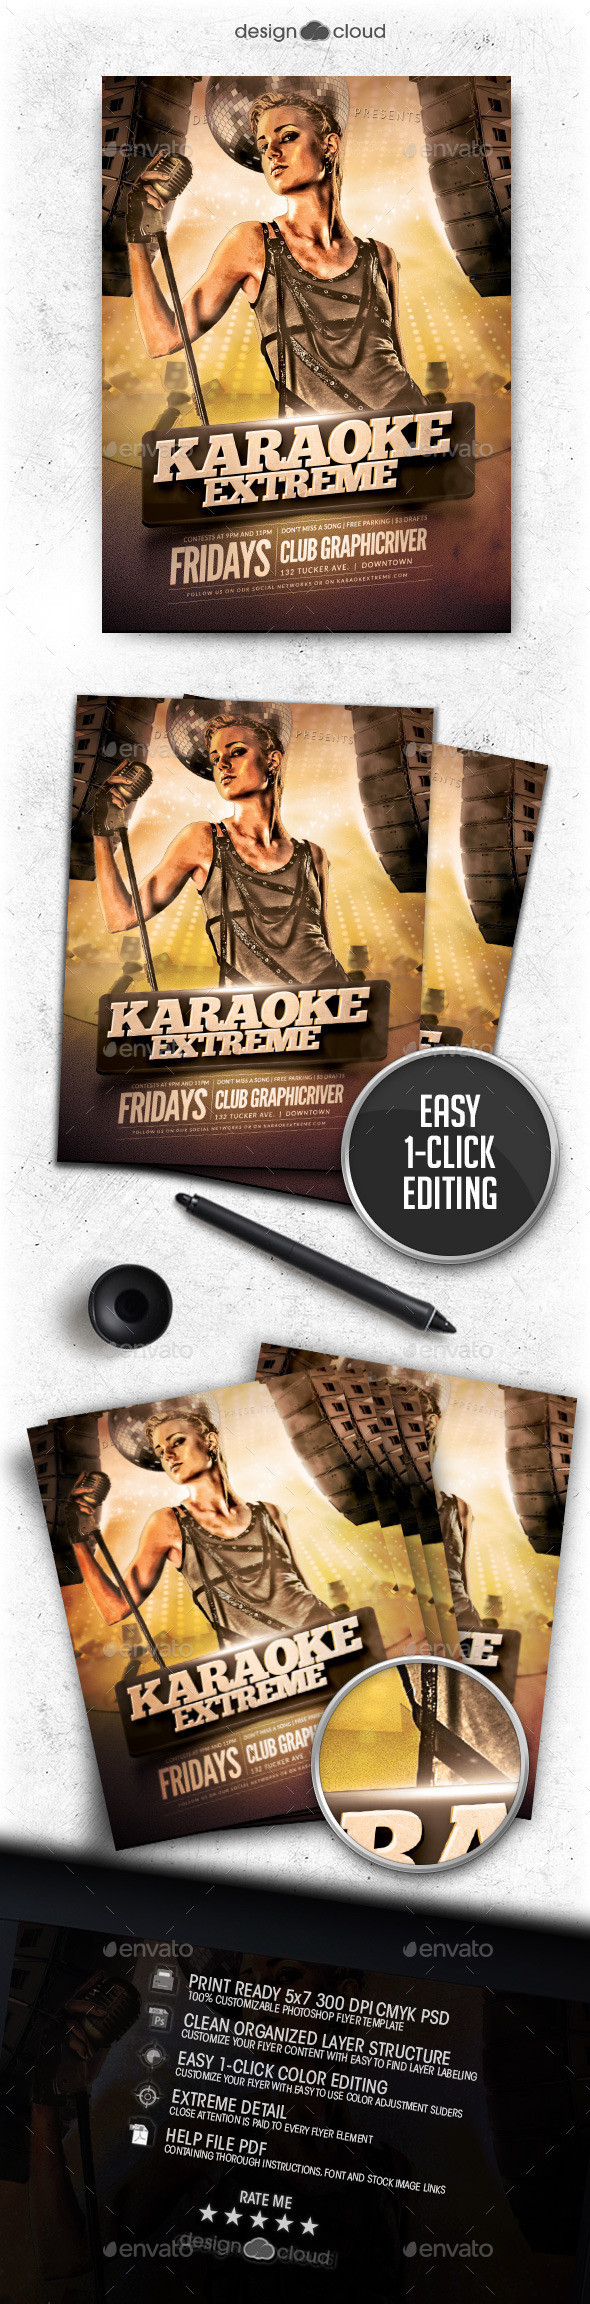 Preview karaoke extreme flyer template